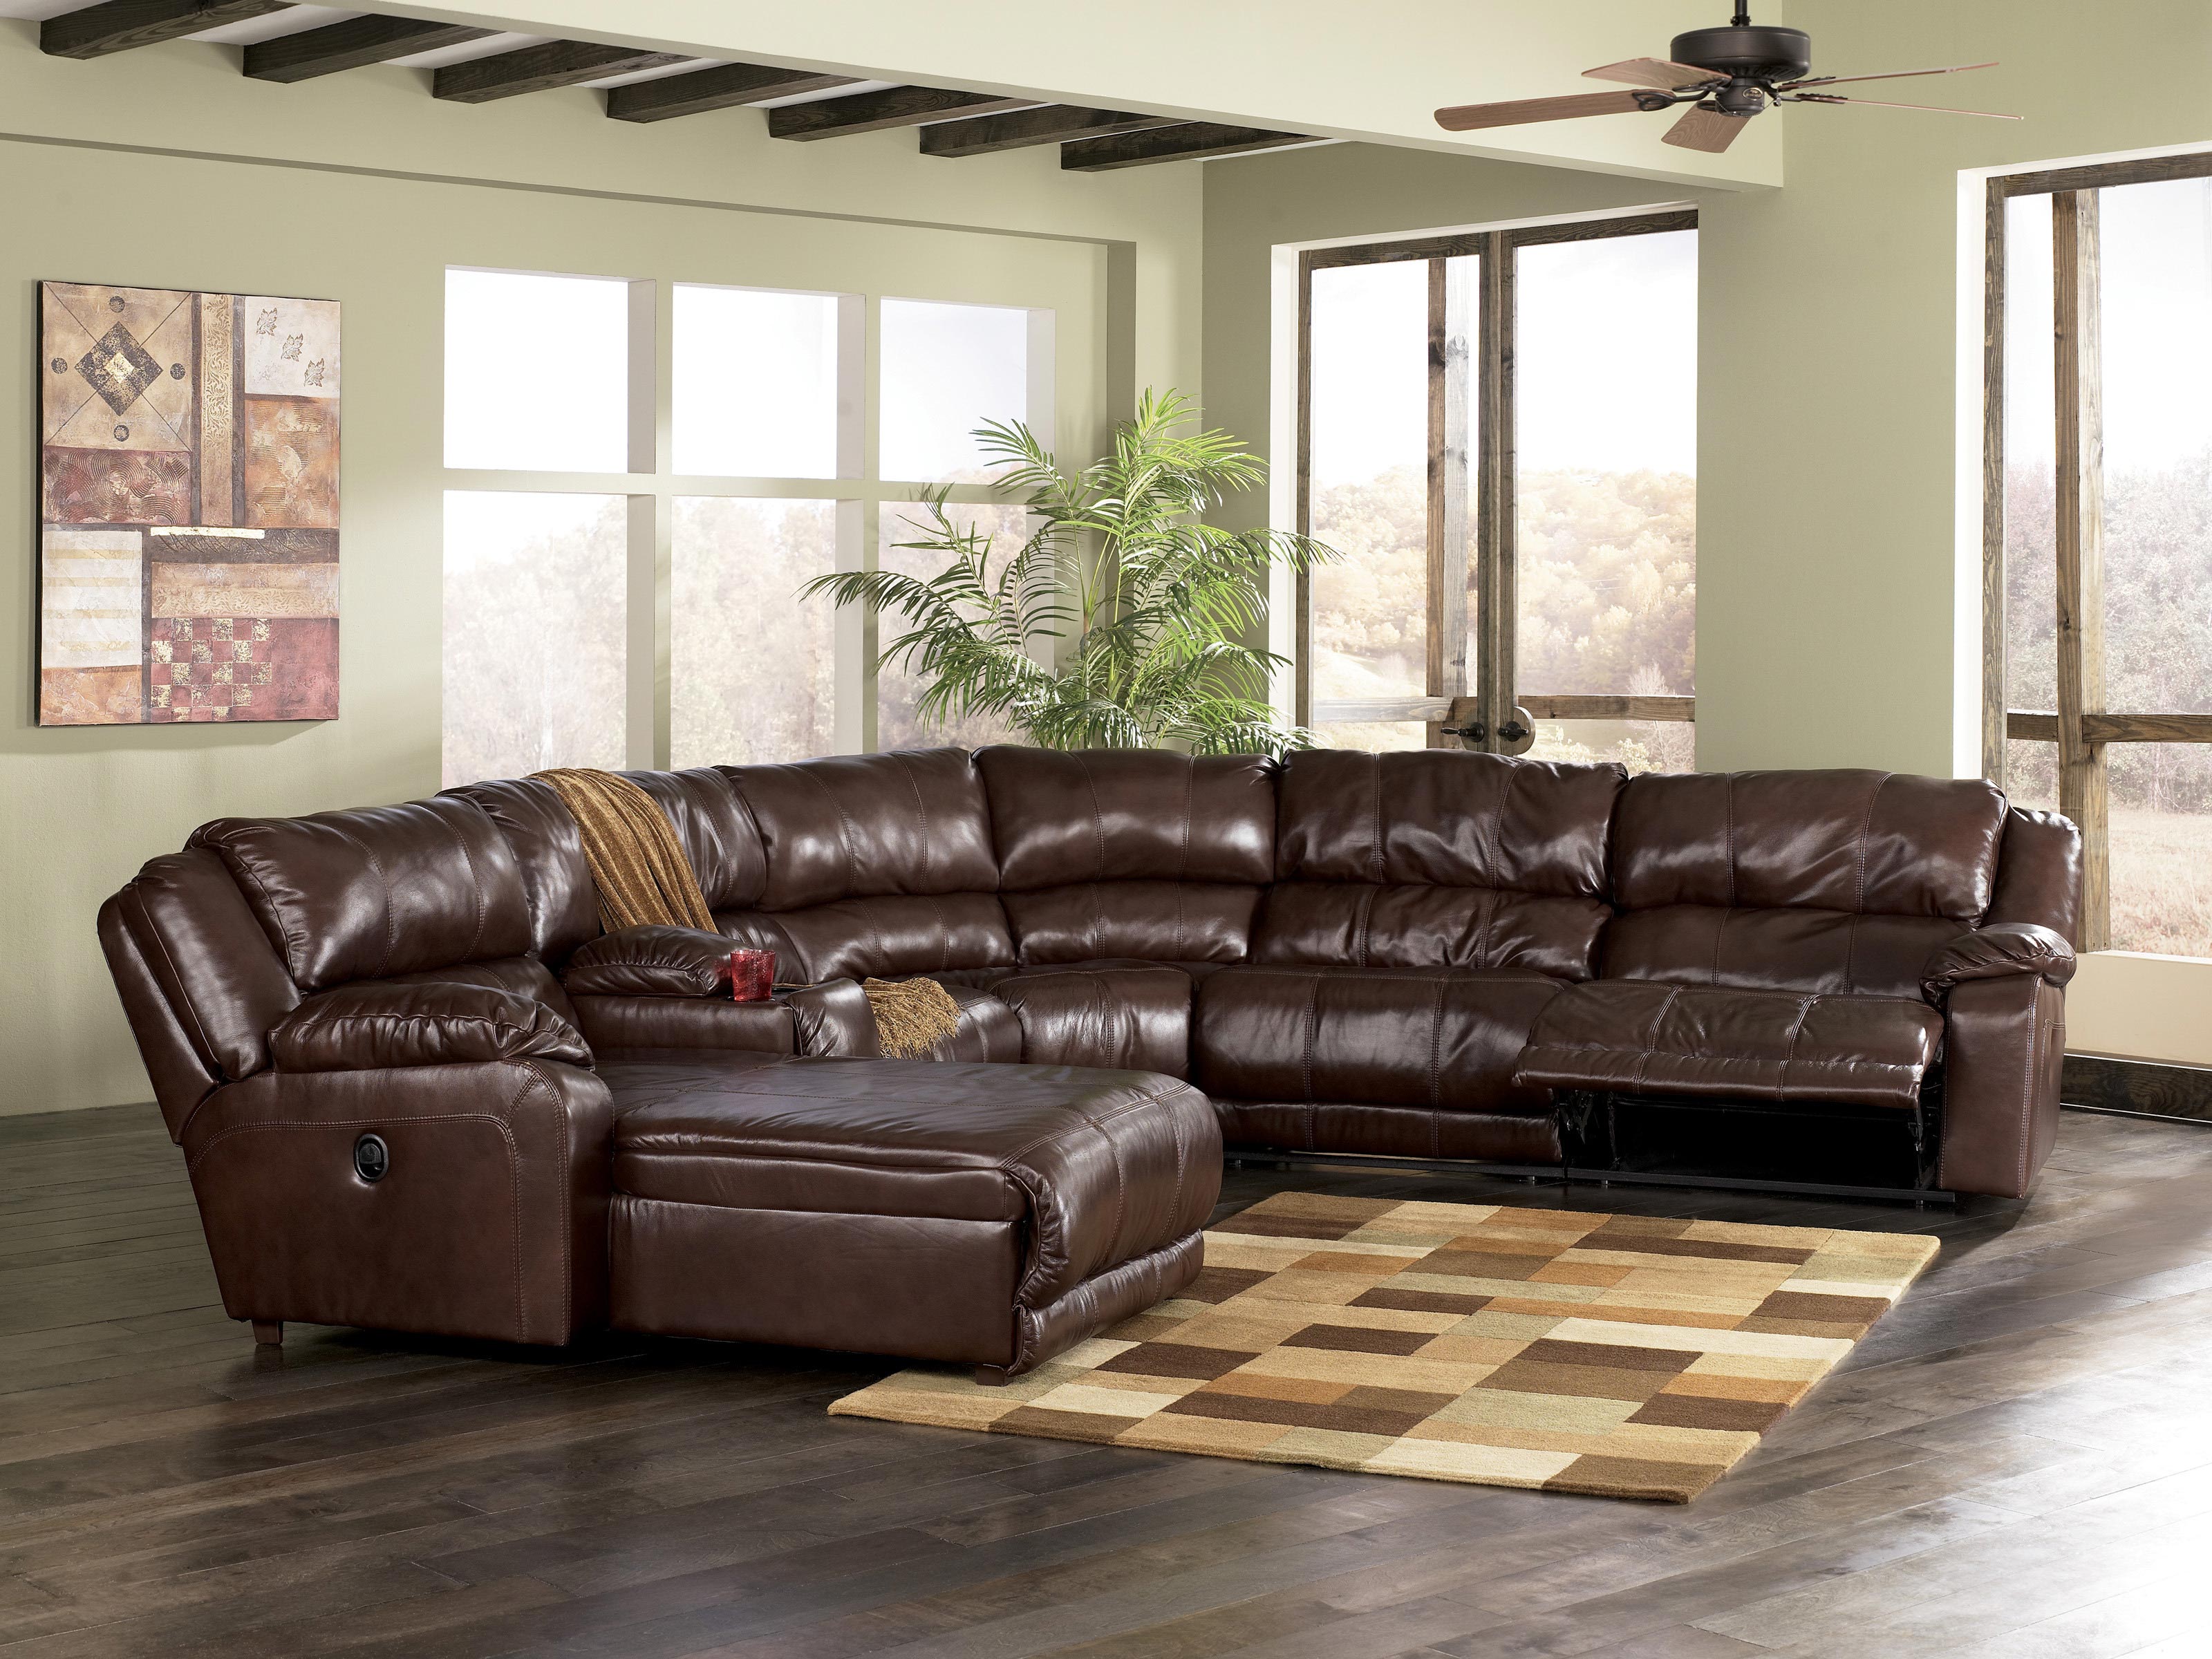 living room leather sofa layout